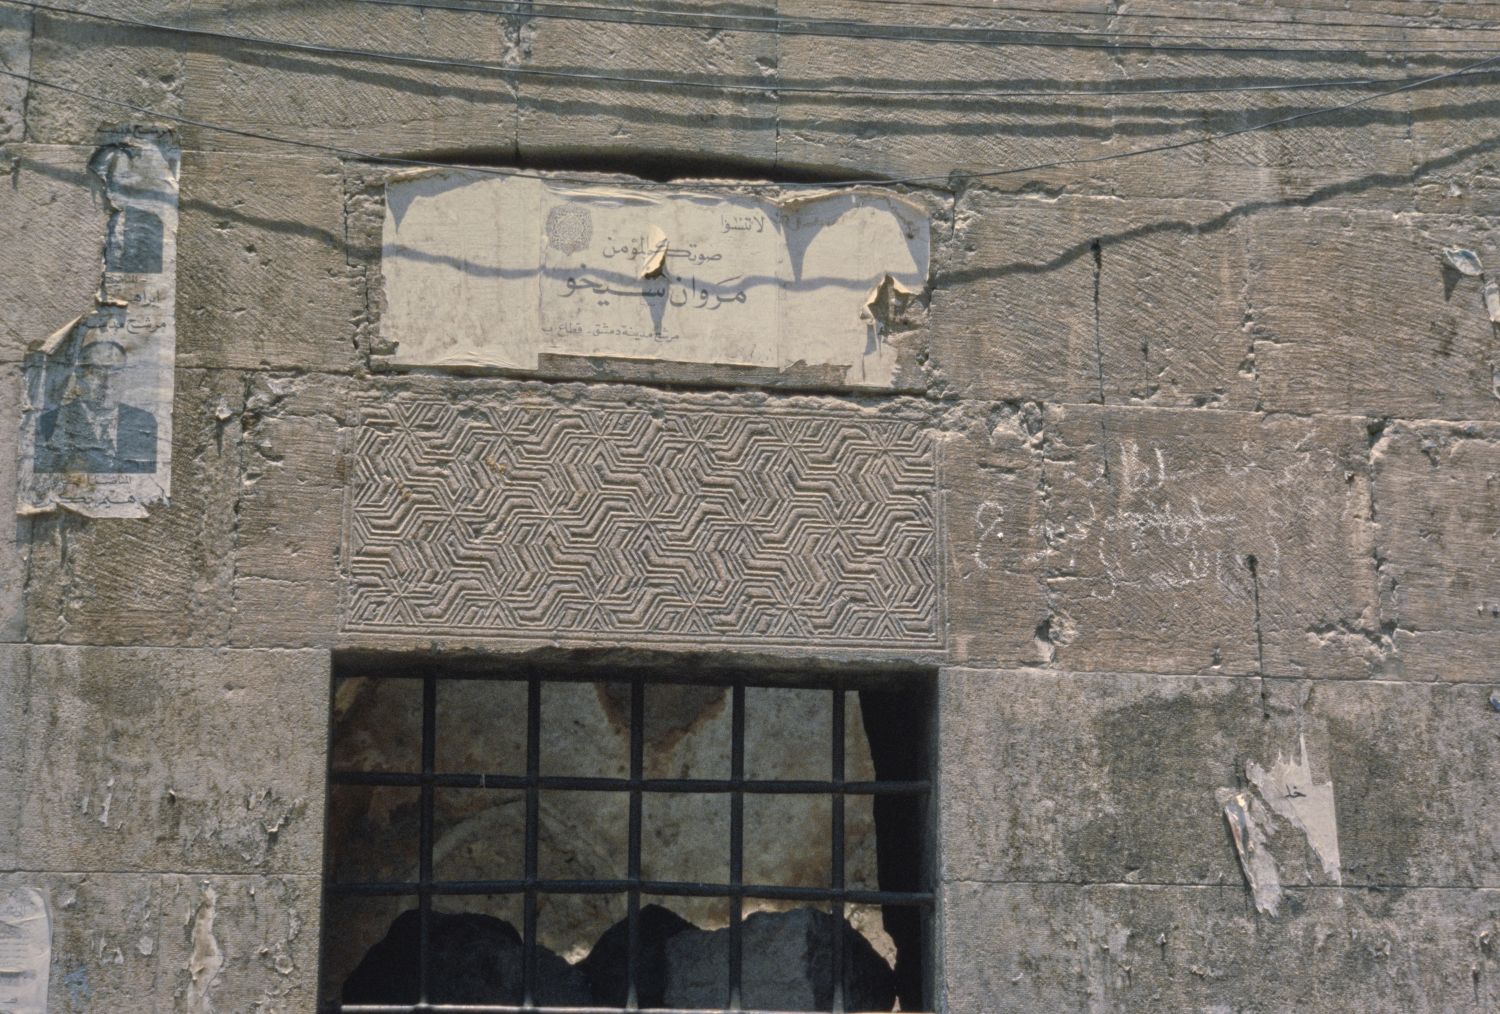 View of window with decoration on lintel.